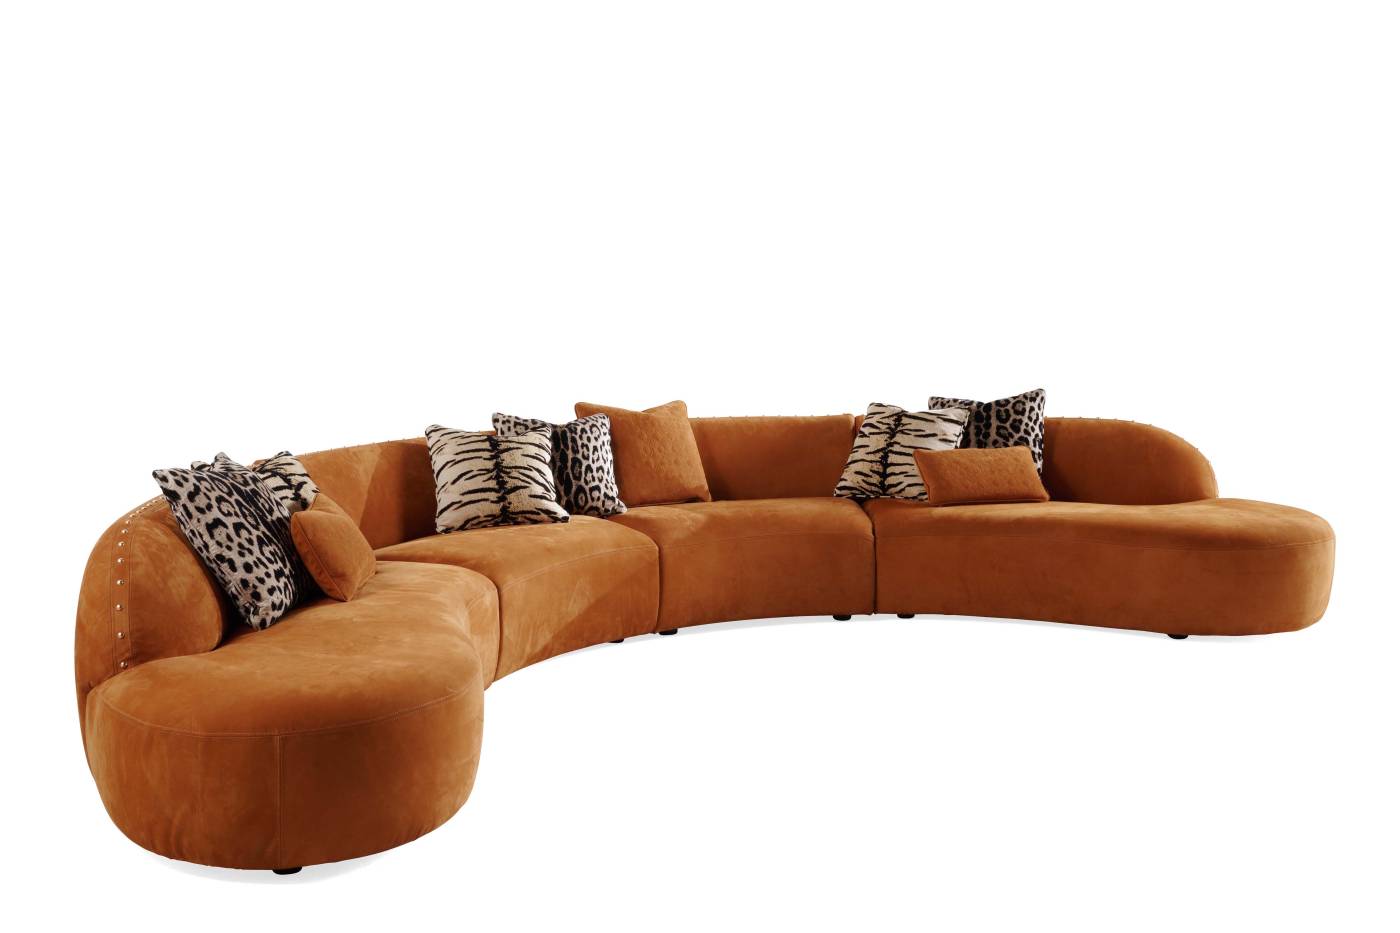 RCHI_ELOBAY_sectional-sofa_composition-A_2023_01.jpg